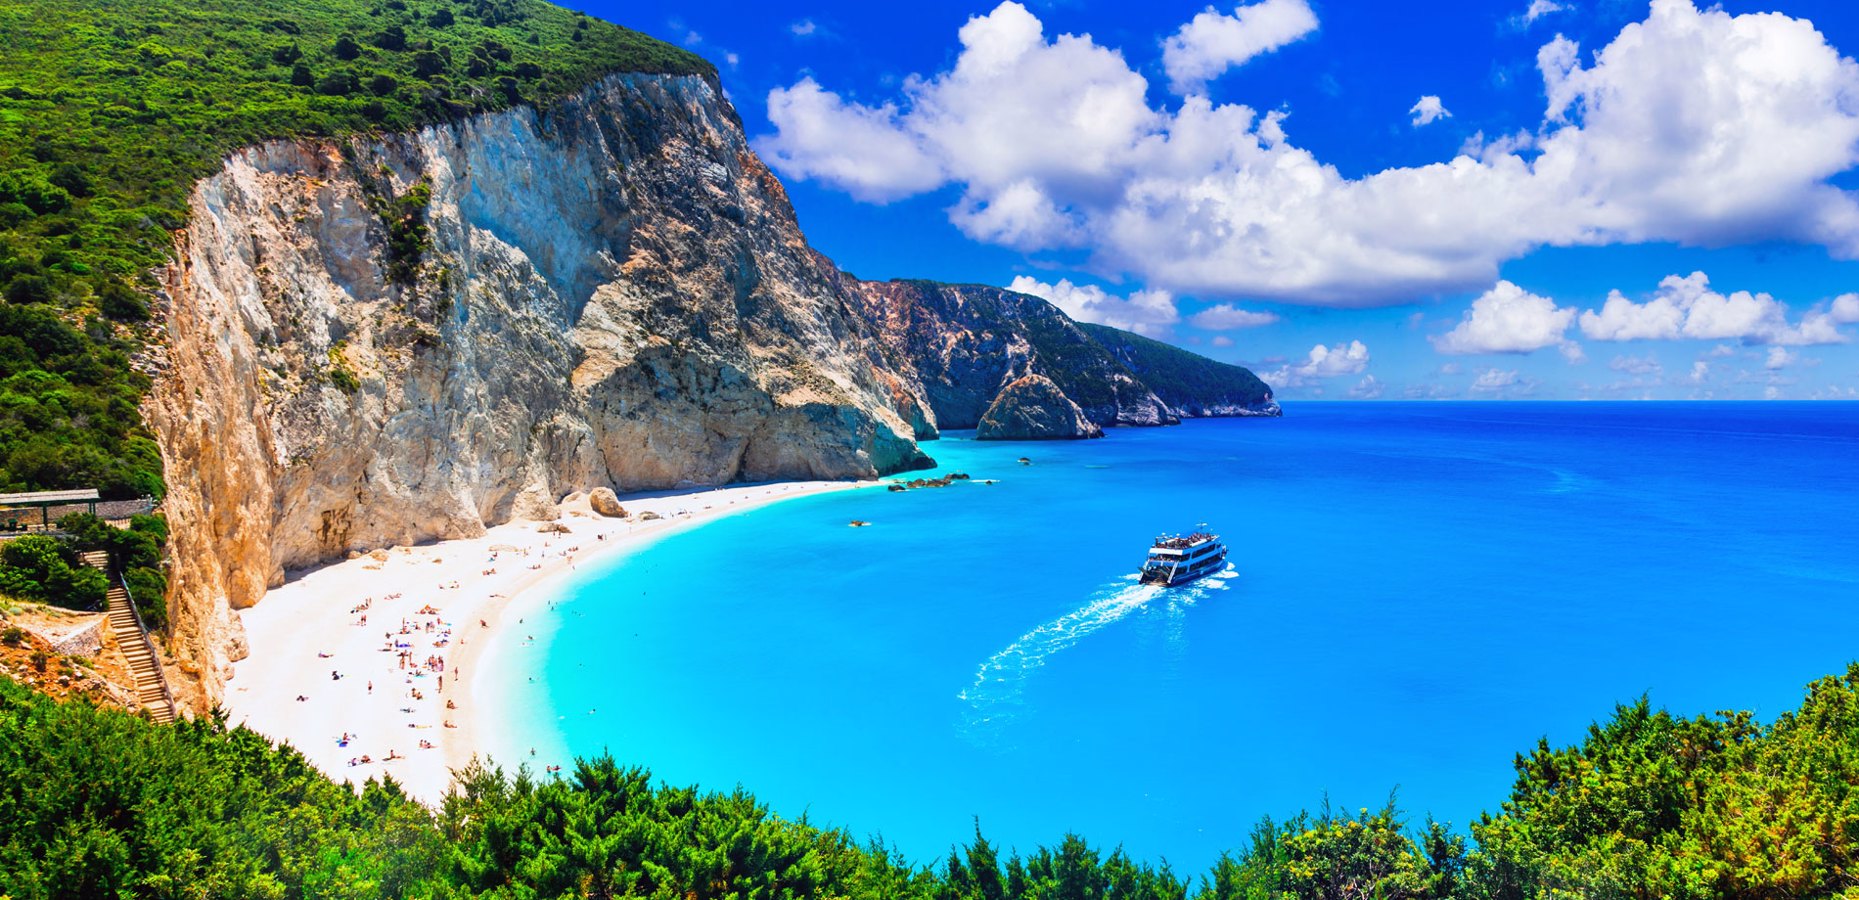 Lefkada, places to visit?